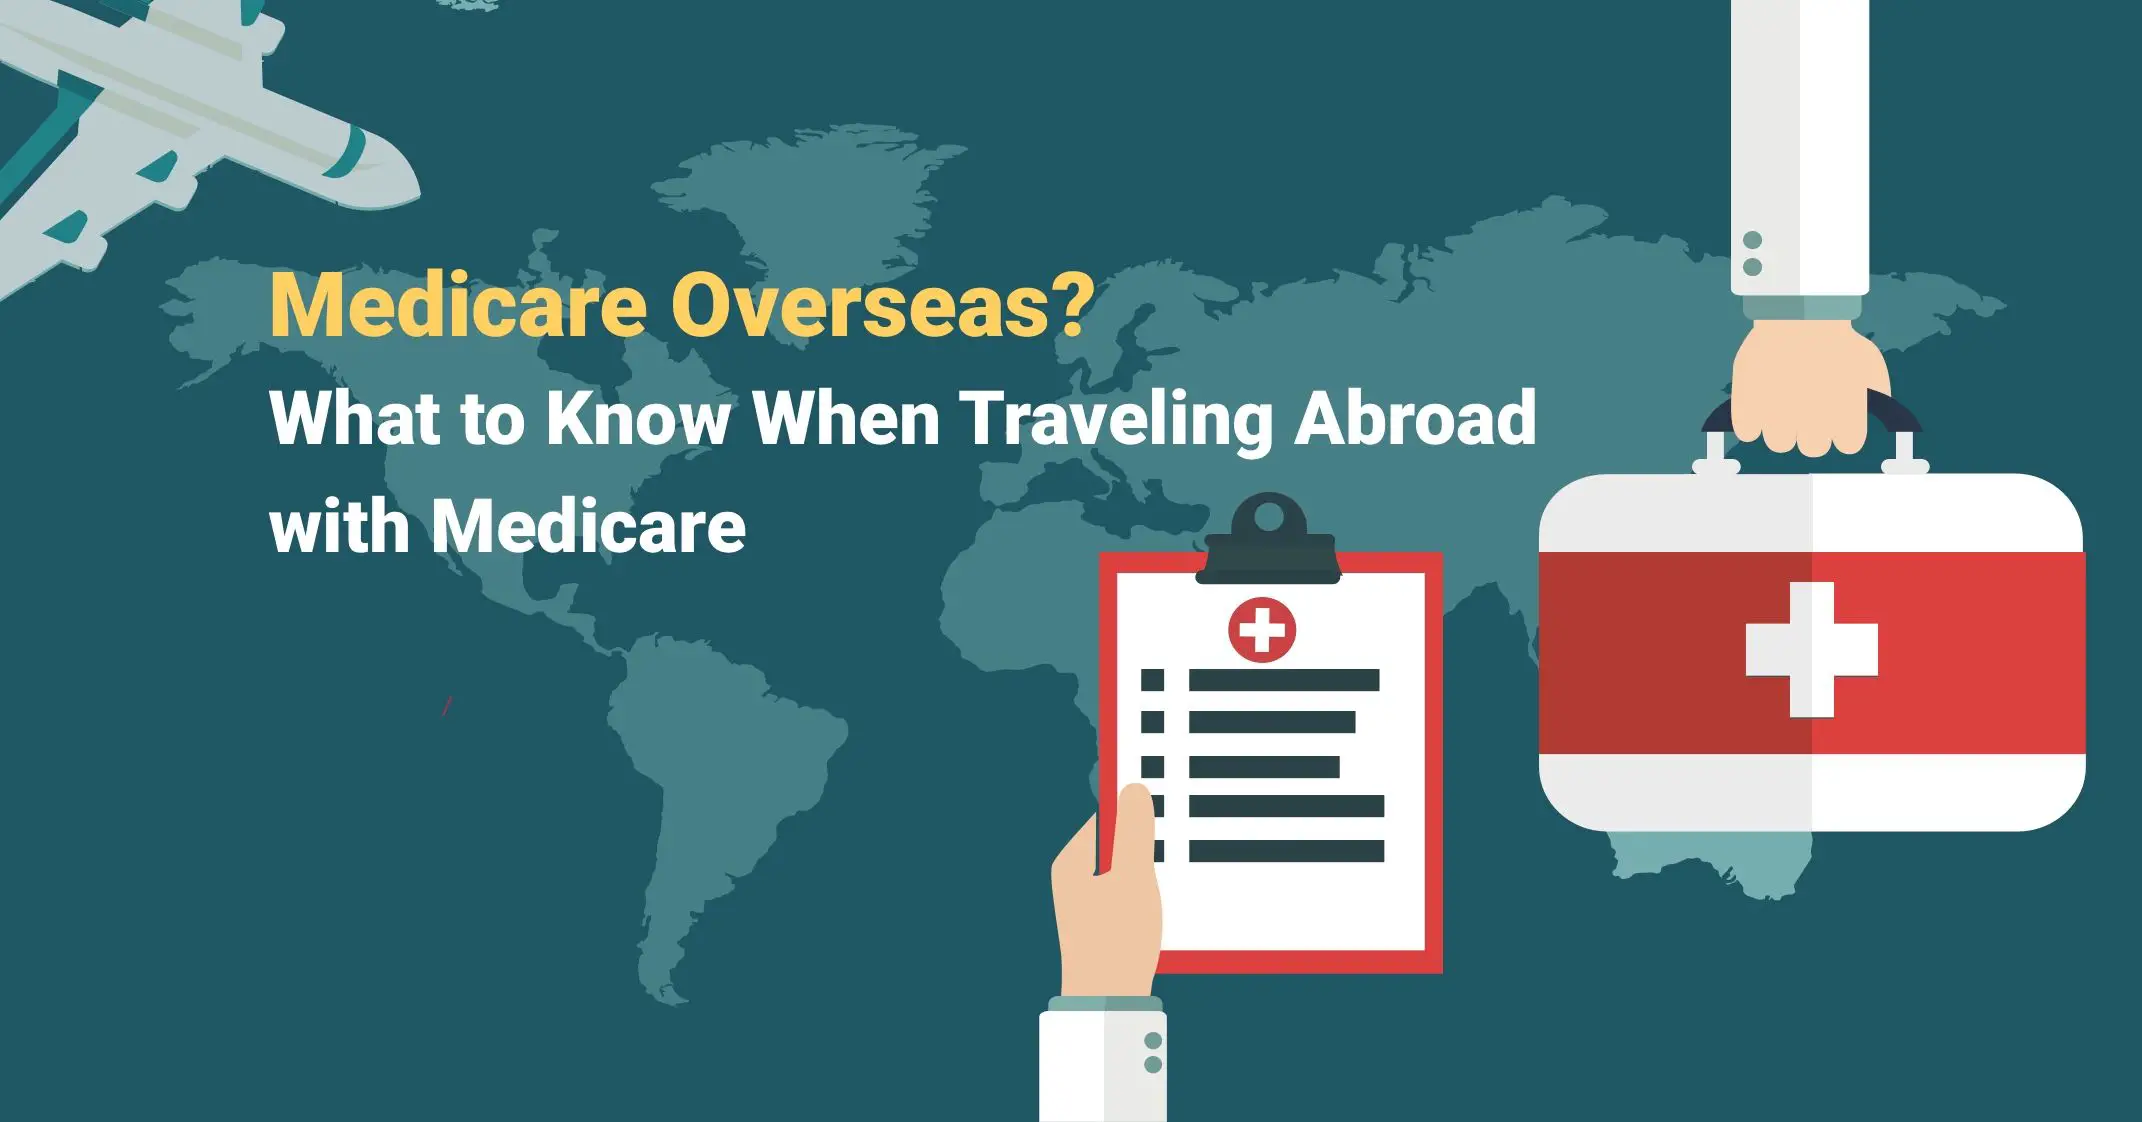 Medicare Overseas? Traveling Abroad with Medicare ...